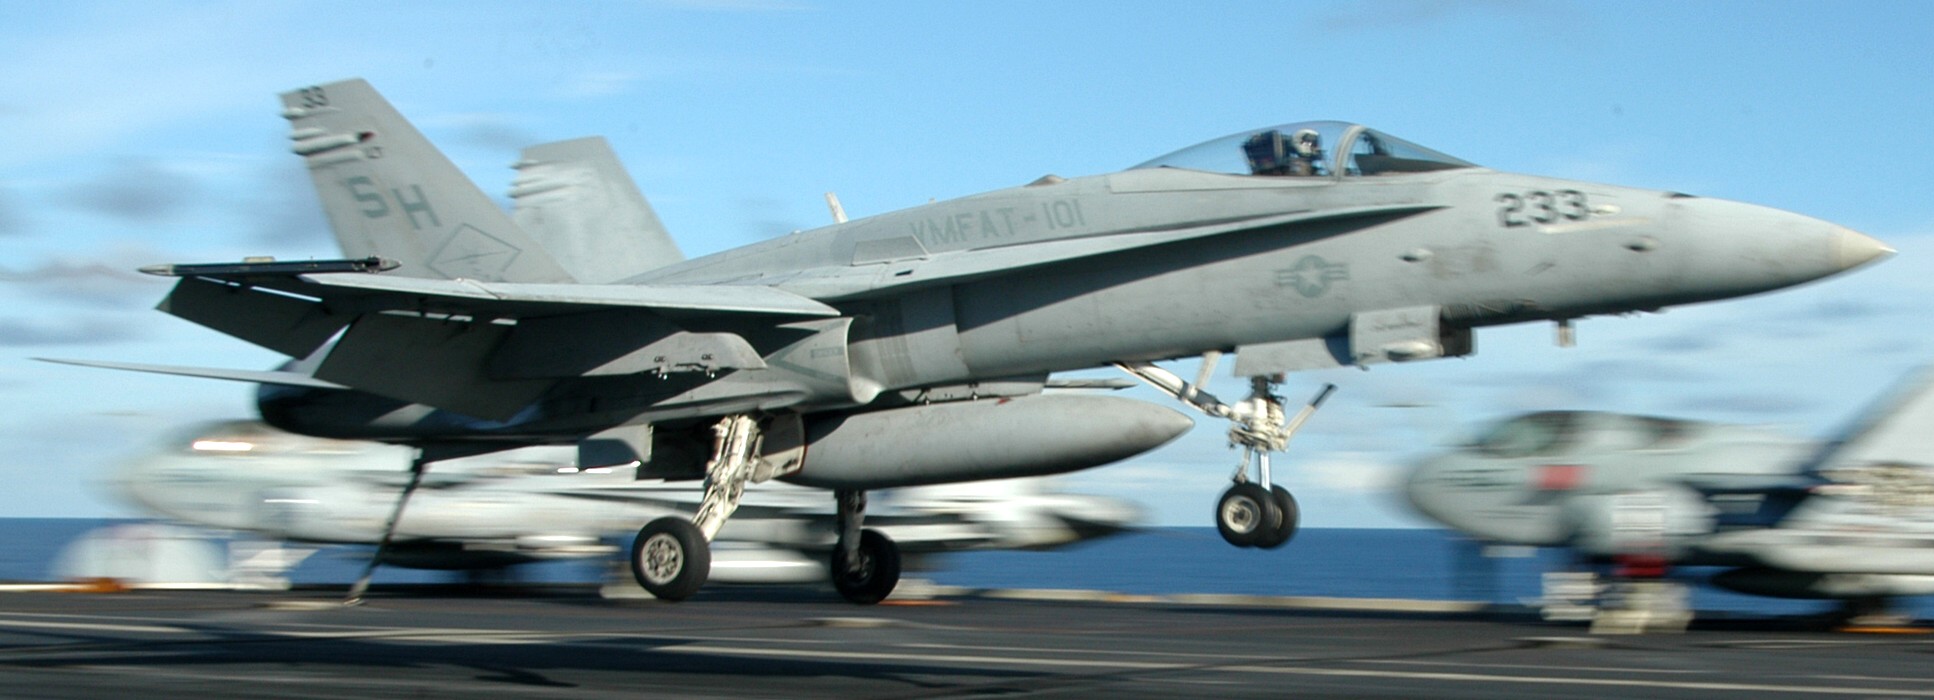 vmfat-101 sharpshooters marine fighter attack training squadron f/a-18c hornet cvn-71 uss theodore roosevelt 105